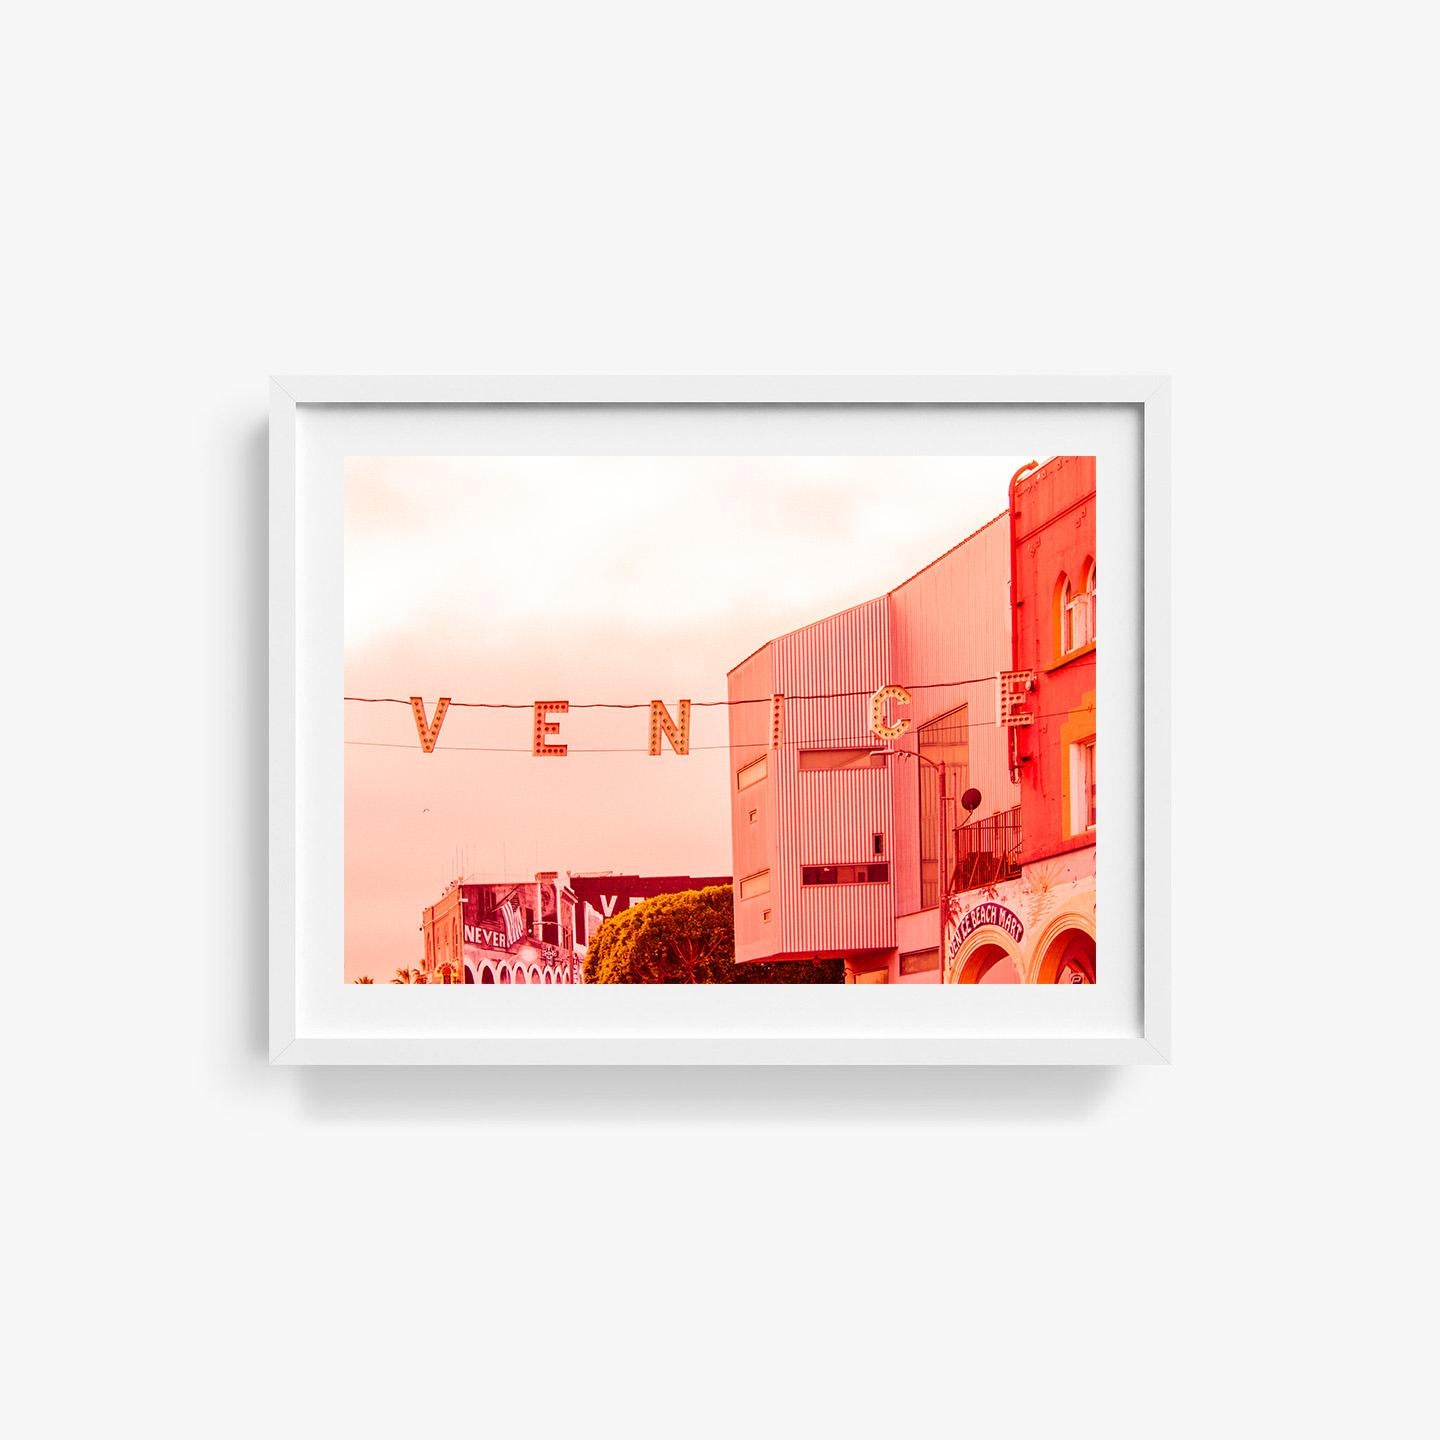 Venice in Pink - Photograph by Nicoline Aagesen